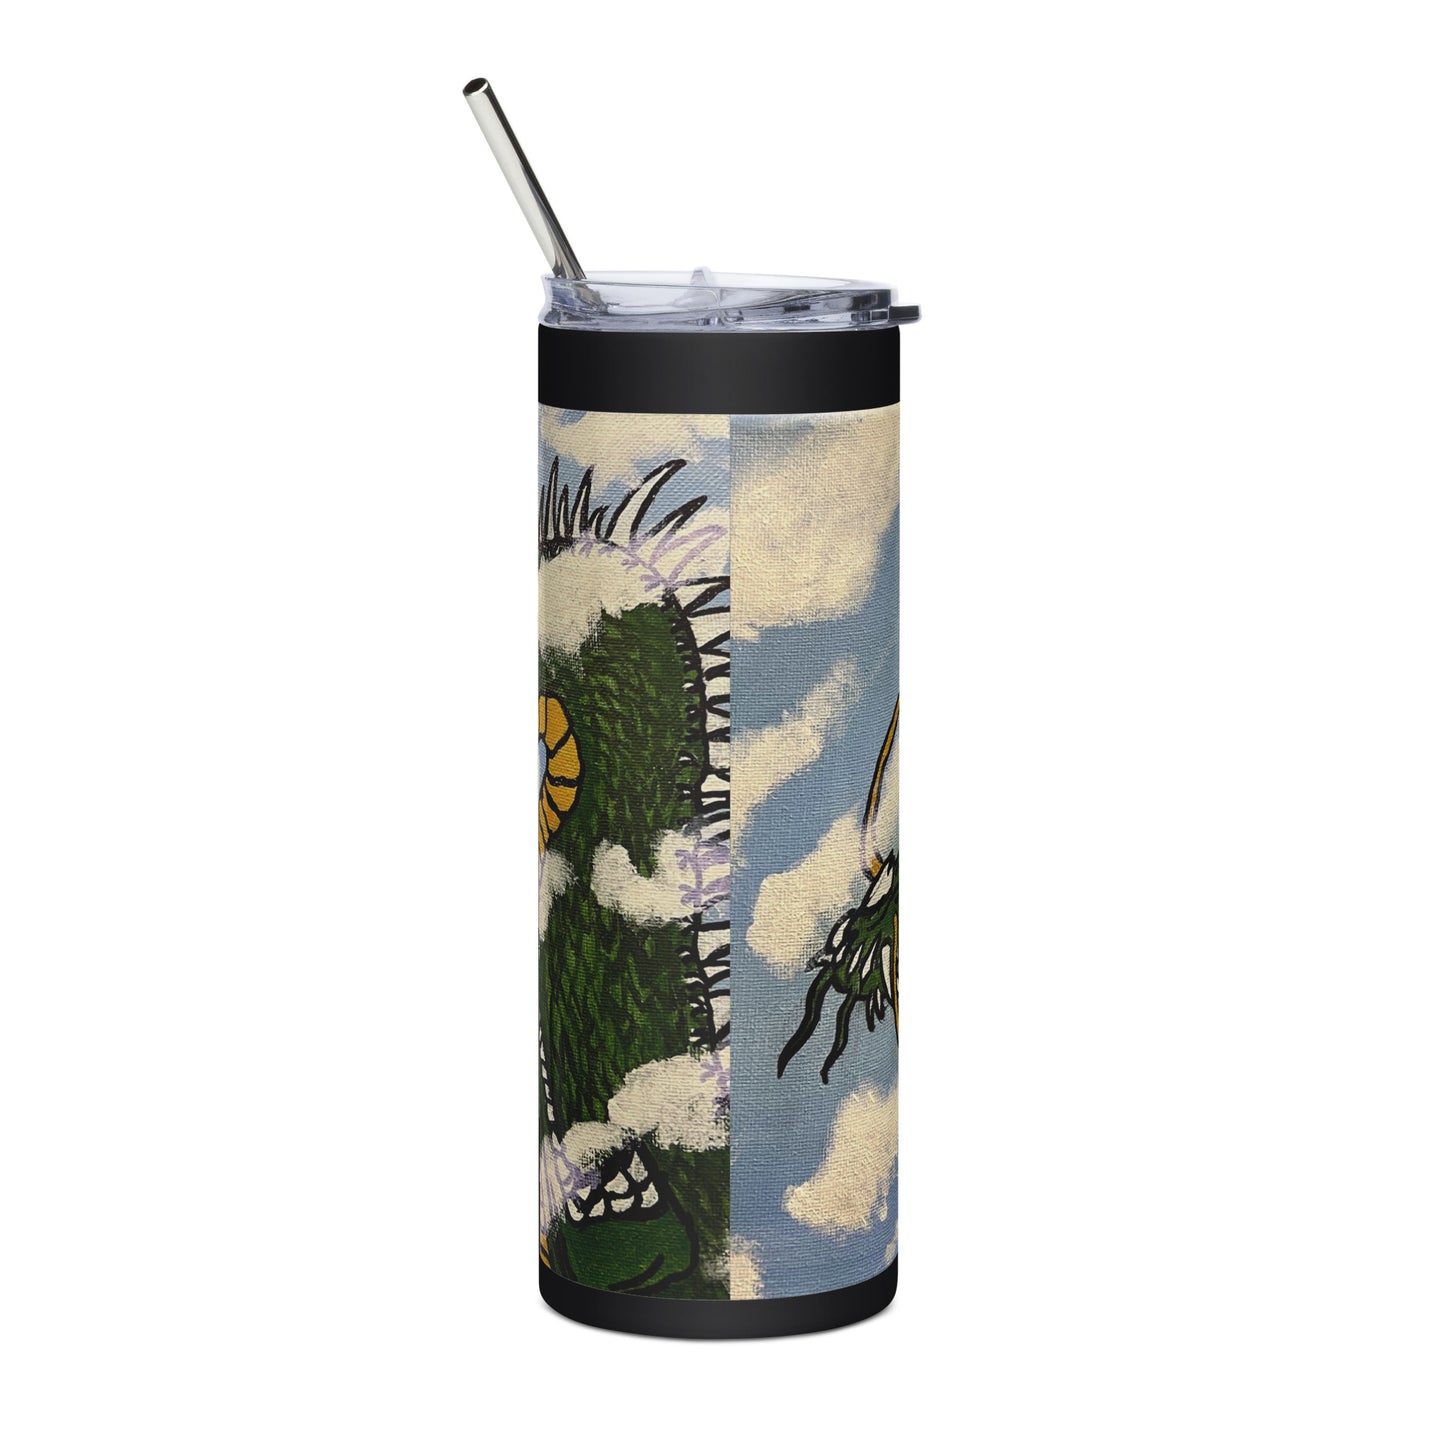 "Dragon in the clouds" tumbler